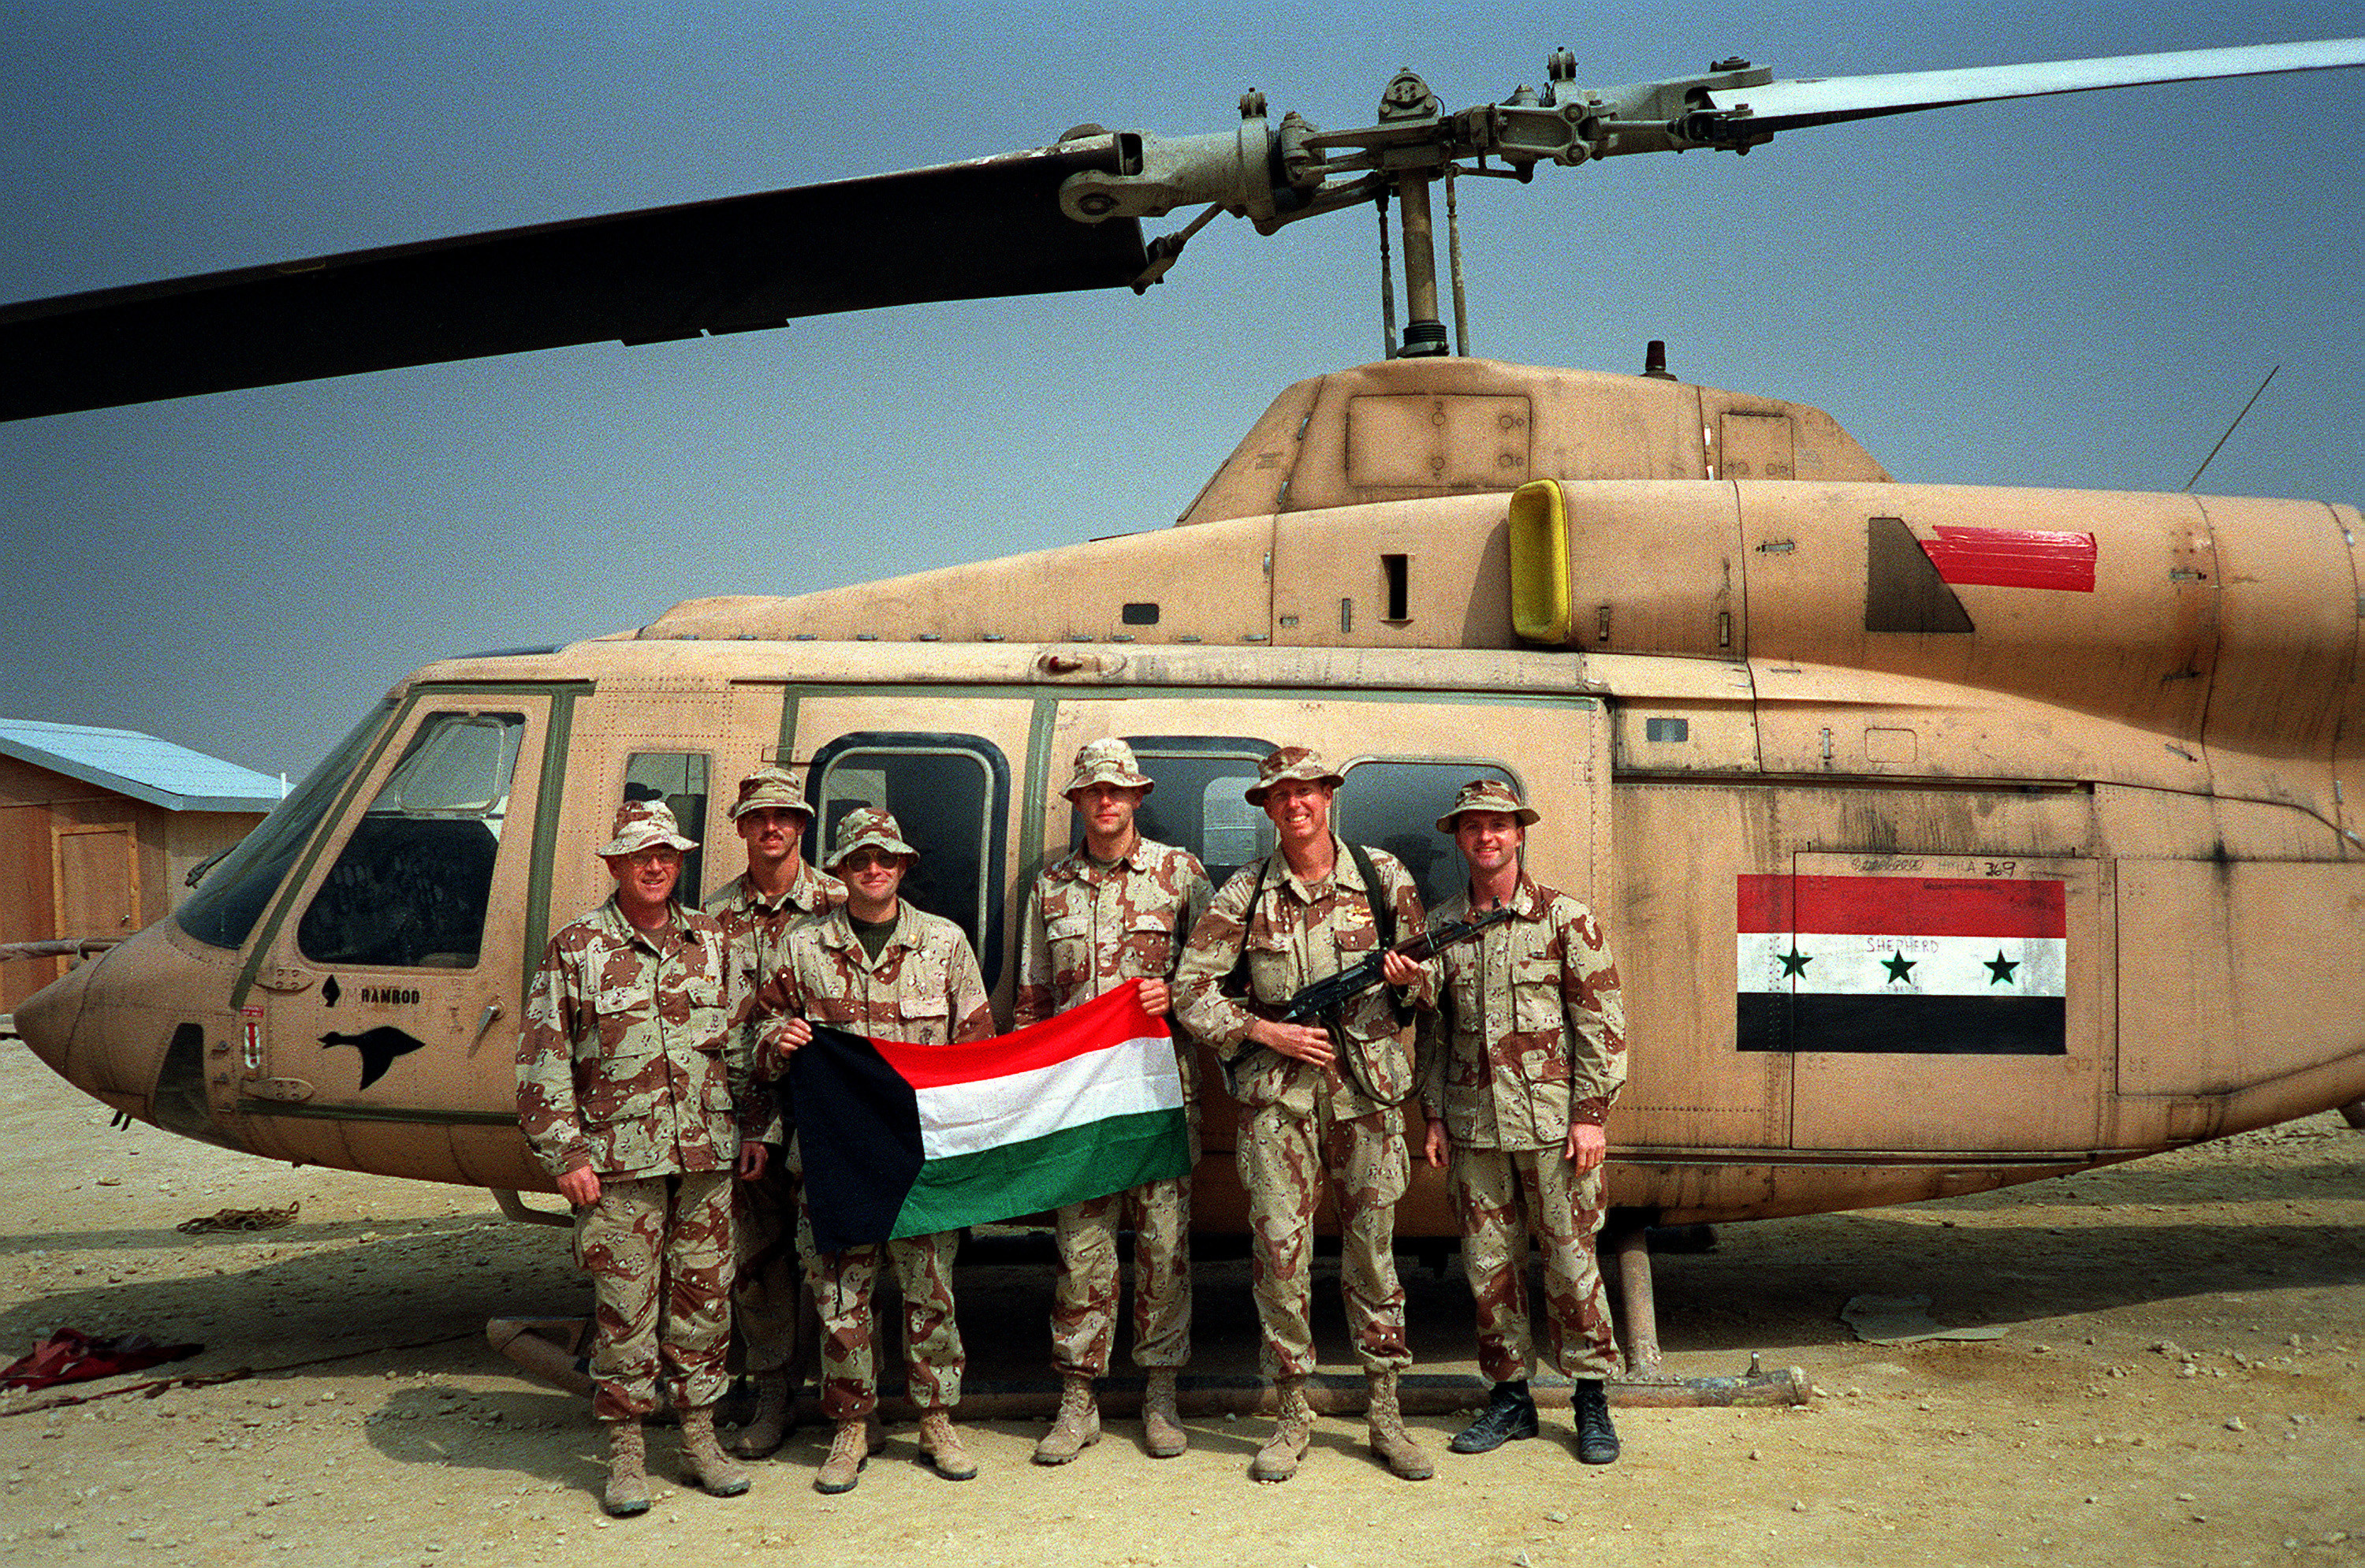 Members_of_the_staff_of_the_3rd_Marine_Aircraft_Wing_stand_in_front_of_a_captured_Iraqi_Bell_214ST_Transport_helicopter_during_Operation_Desert_Storm.JPEG